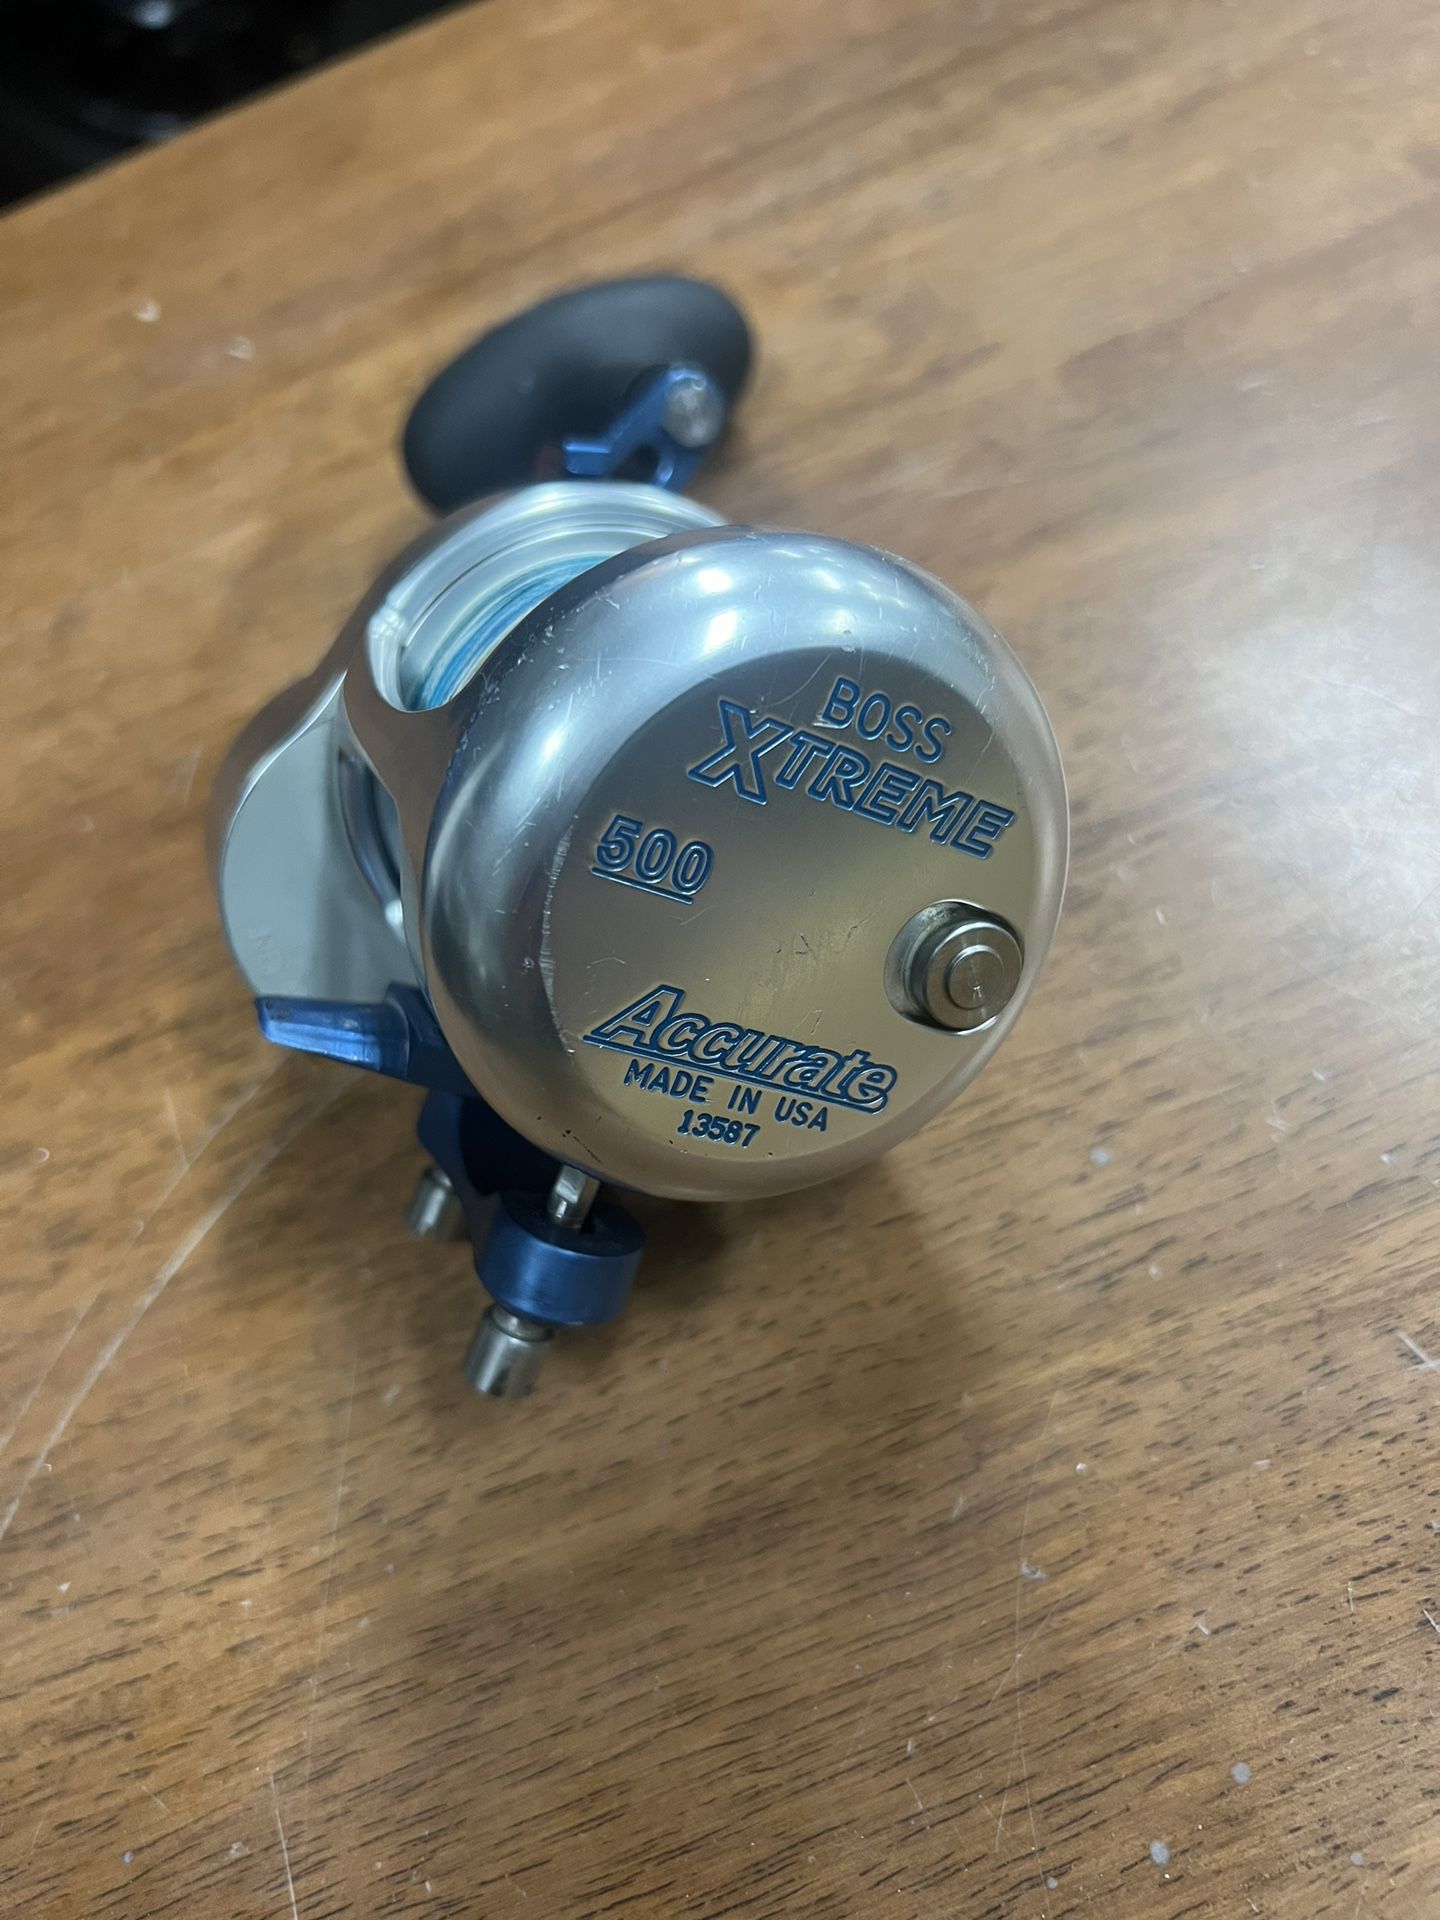 Accurate Boss Extreme 500 BX2 Fishing reel 